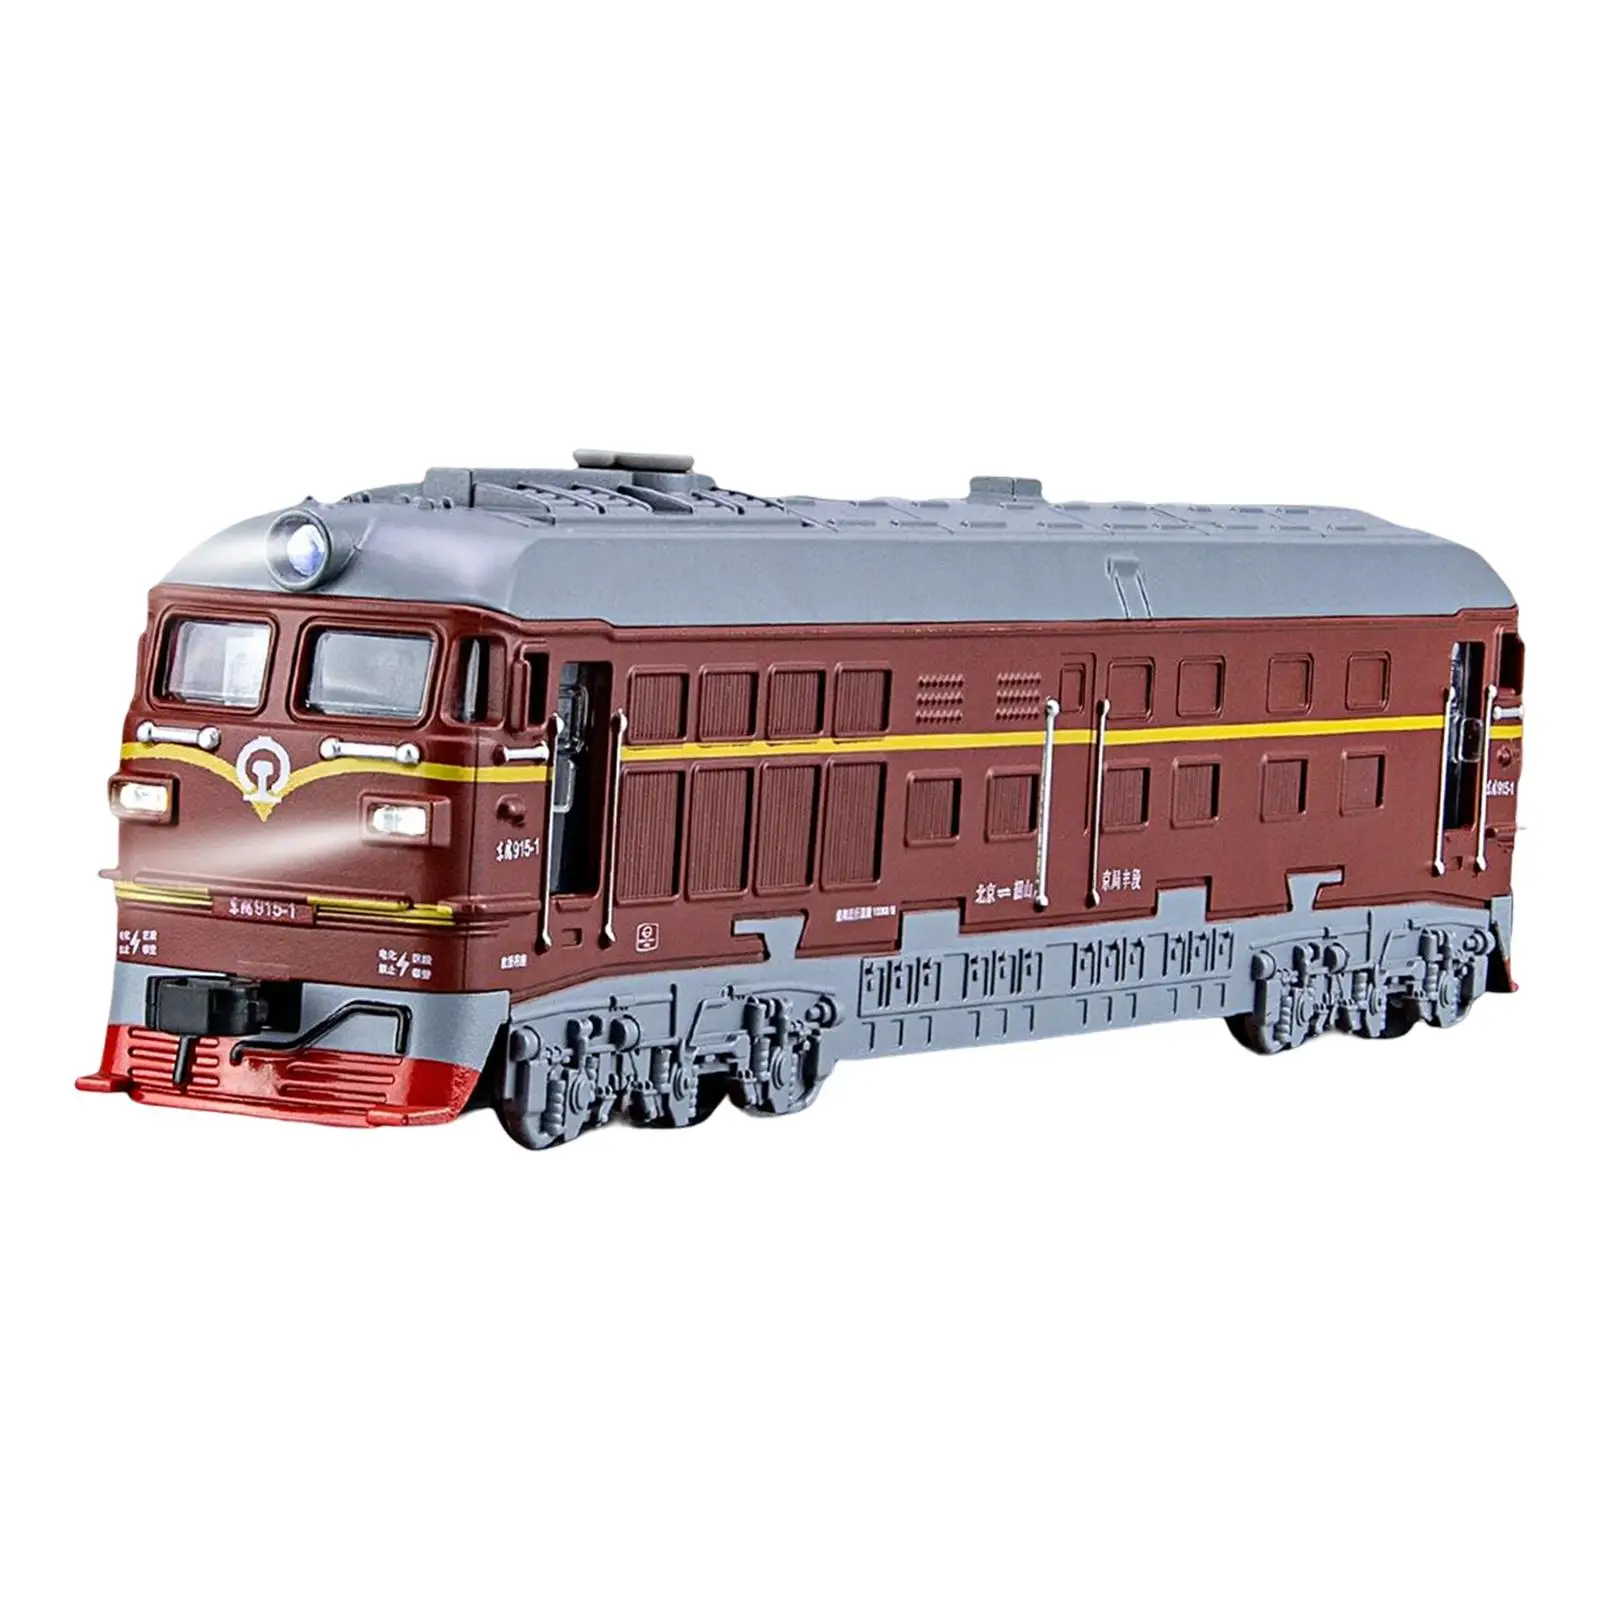 

Mini Alloy Steam Train Toy Ornament Accessories Miniature Scene Model Modern Locomotives Train Toy for Toddlers Kids Girls Boys